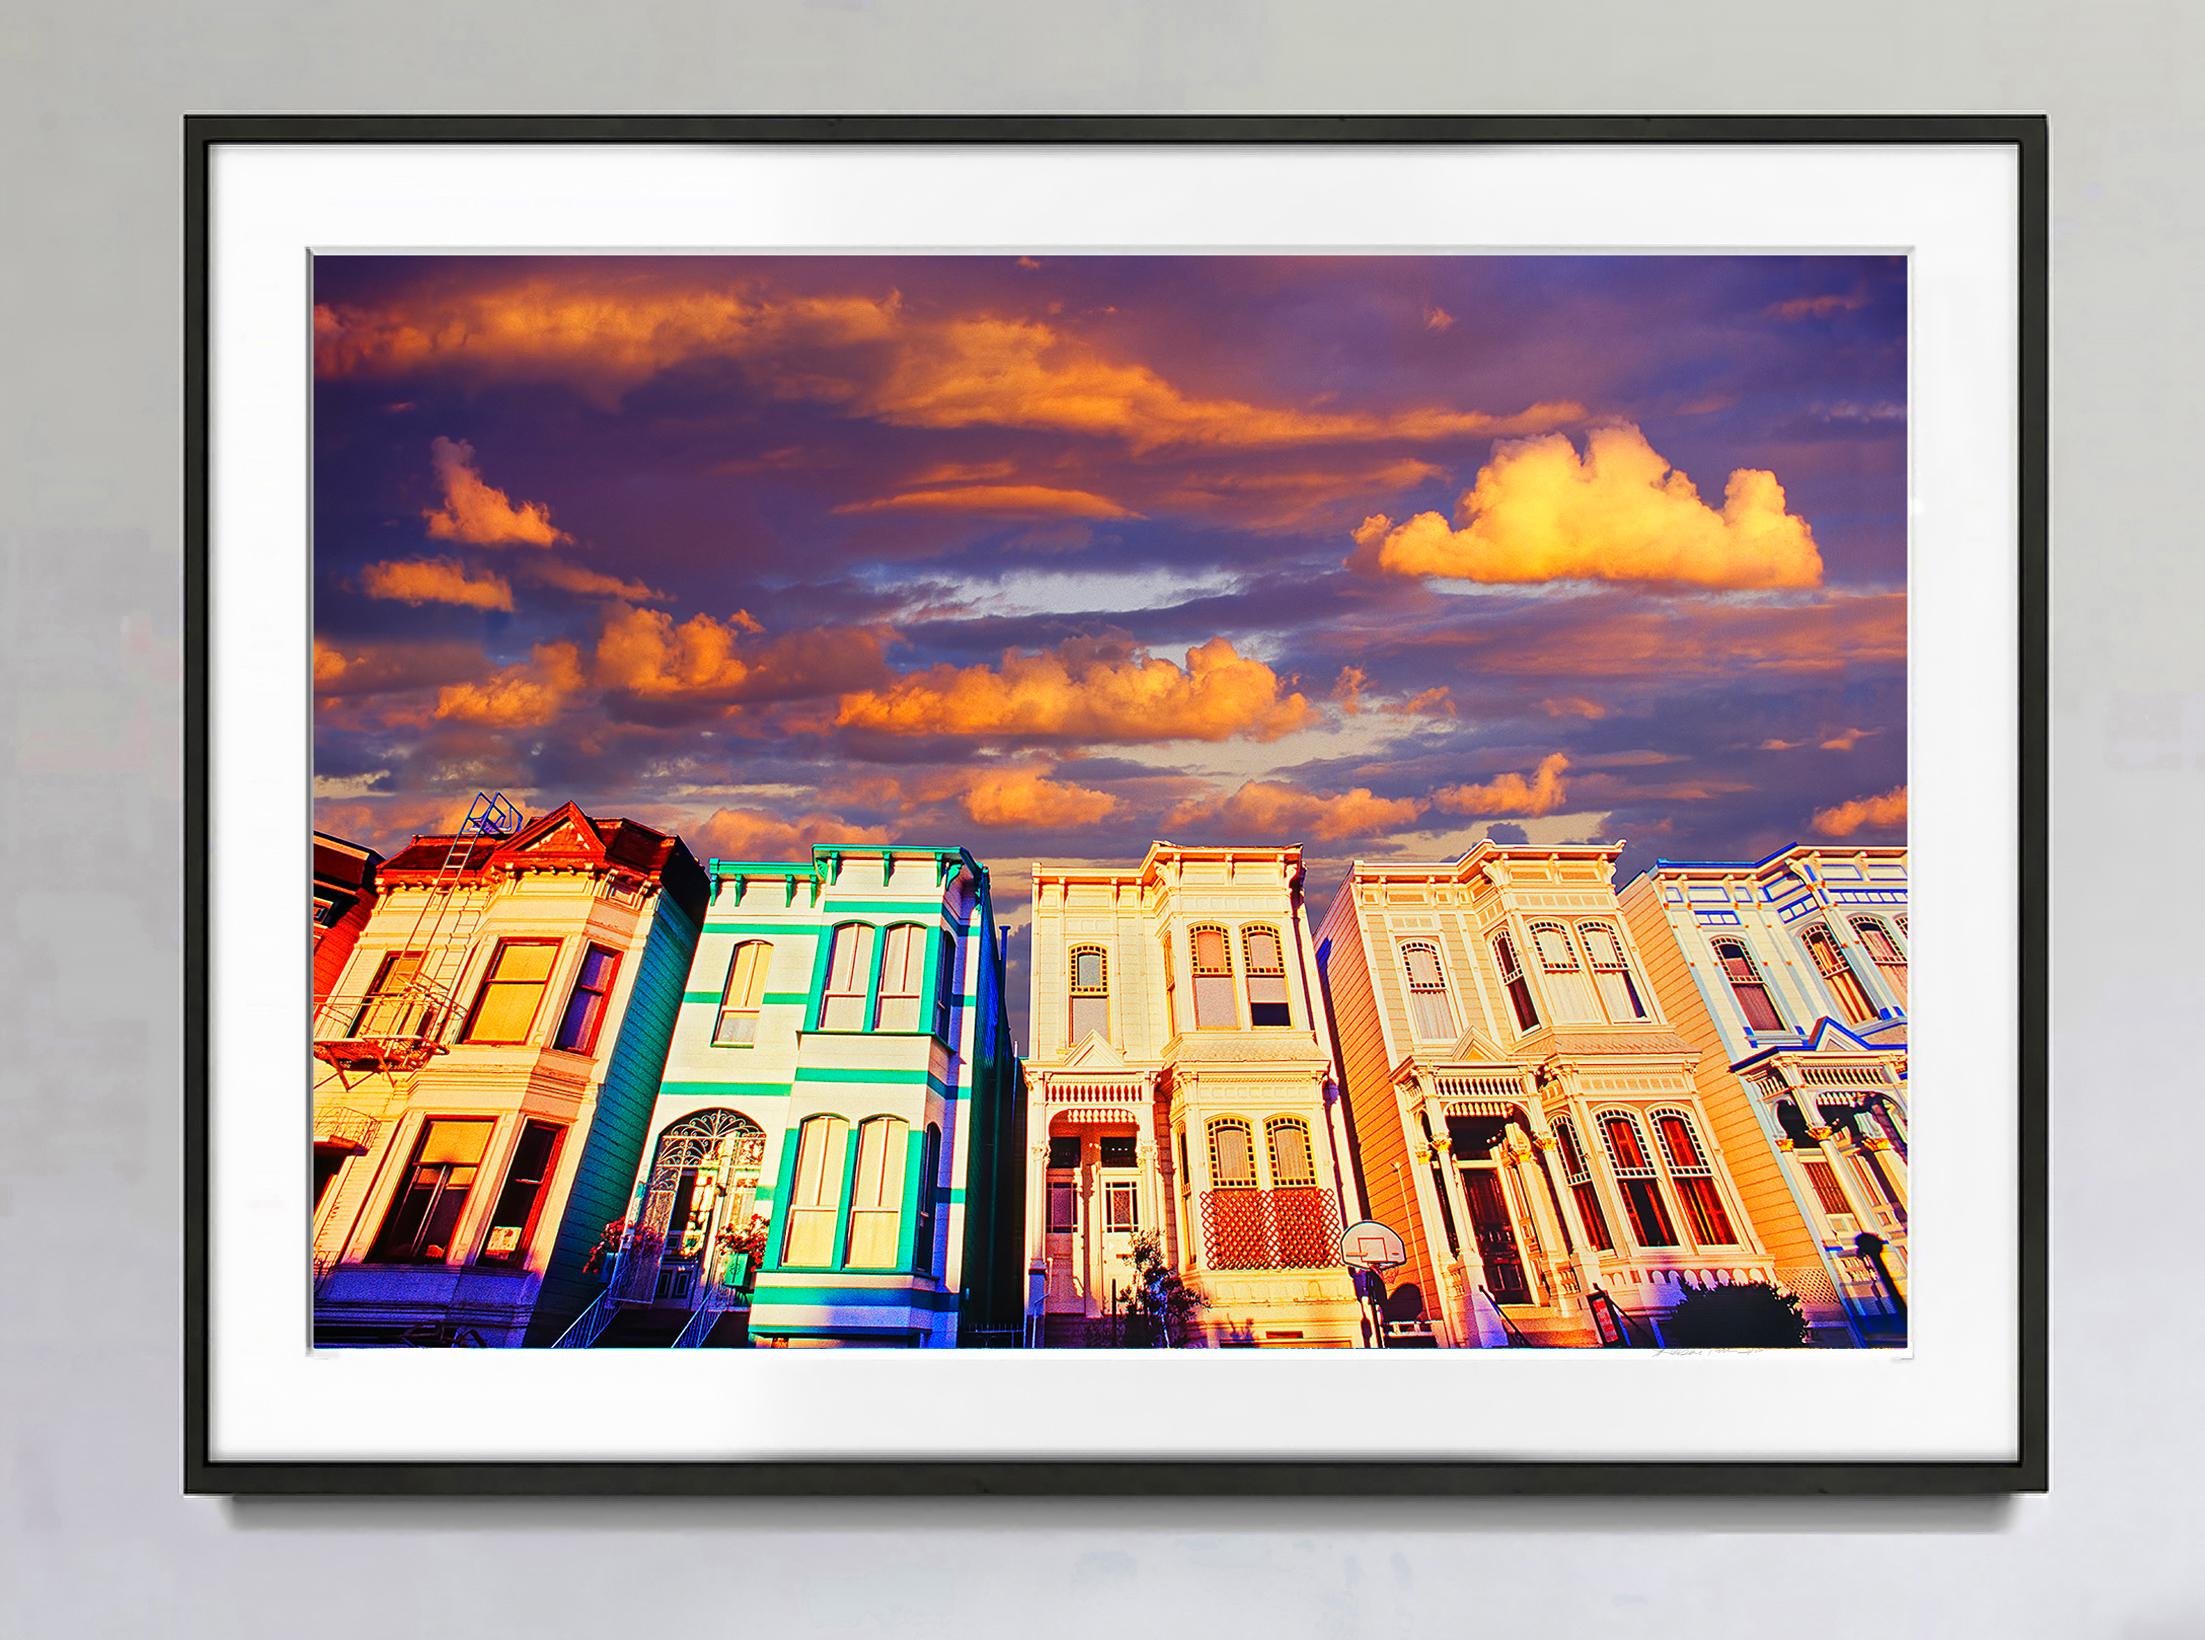 San Francisco Victorian Row Houses in First Light and Billowing Clouds - Photograph by Mitchell Funk